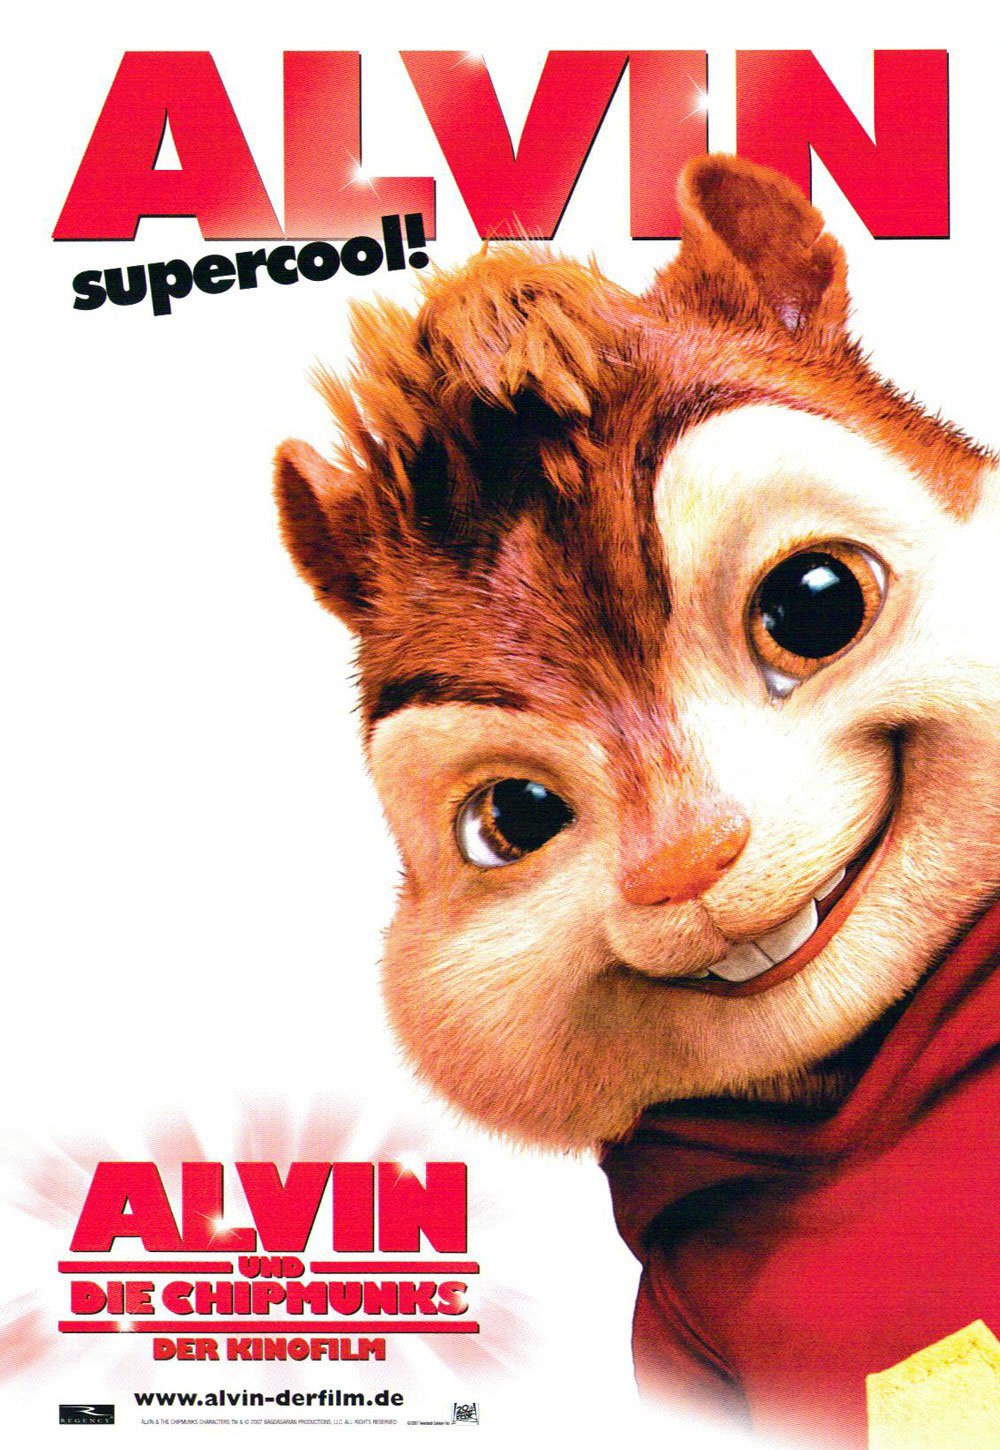 alvin and the chipmunks 2007 full movie free download